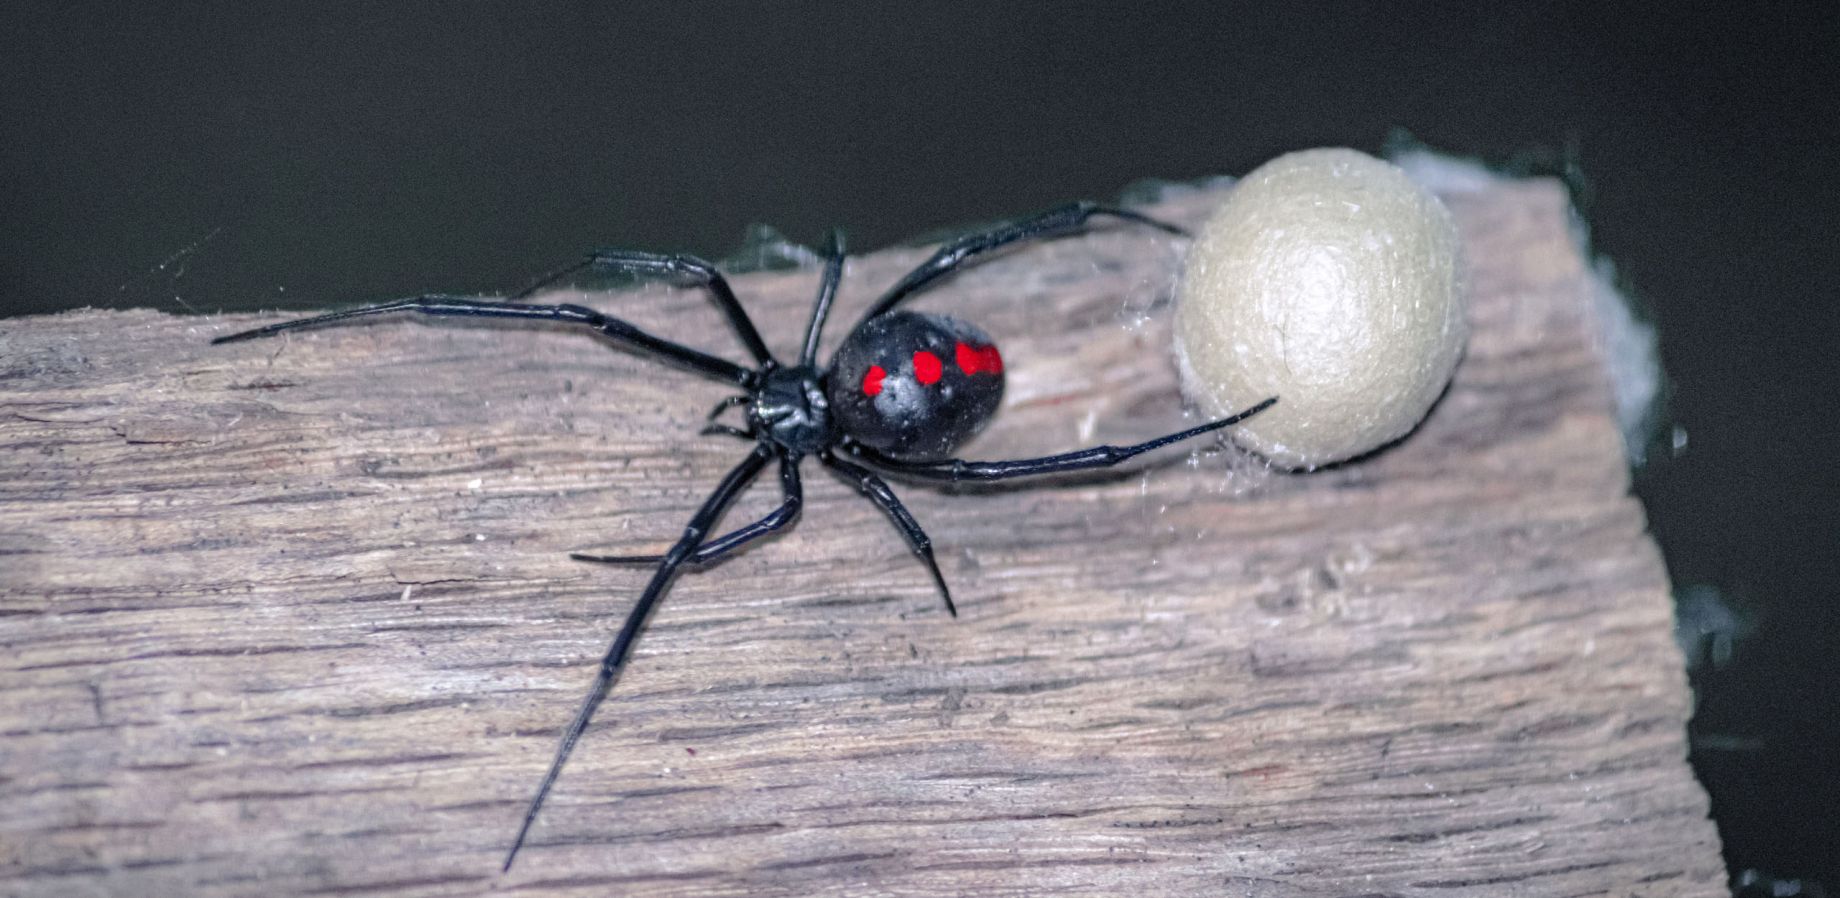 How I Survived a Black Widow Bite with Prayer and Oils - Volume 11, Number 2